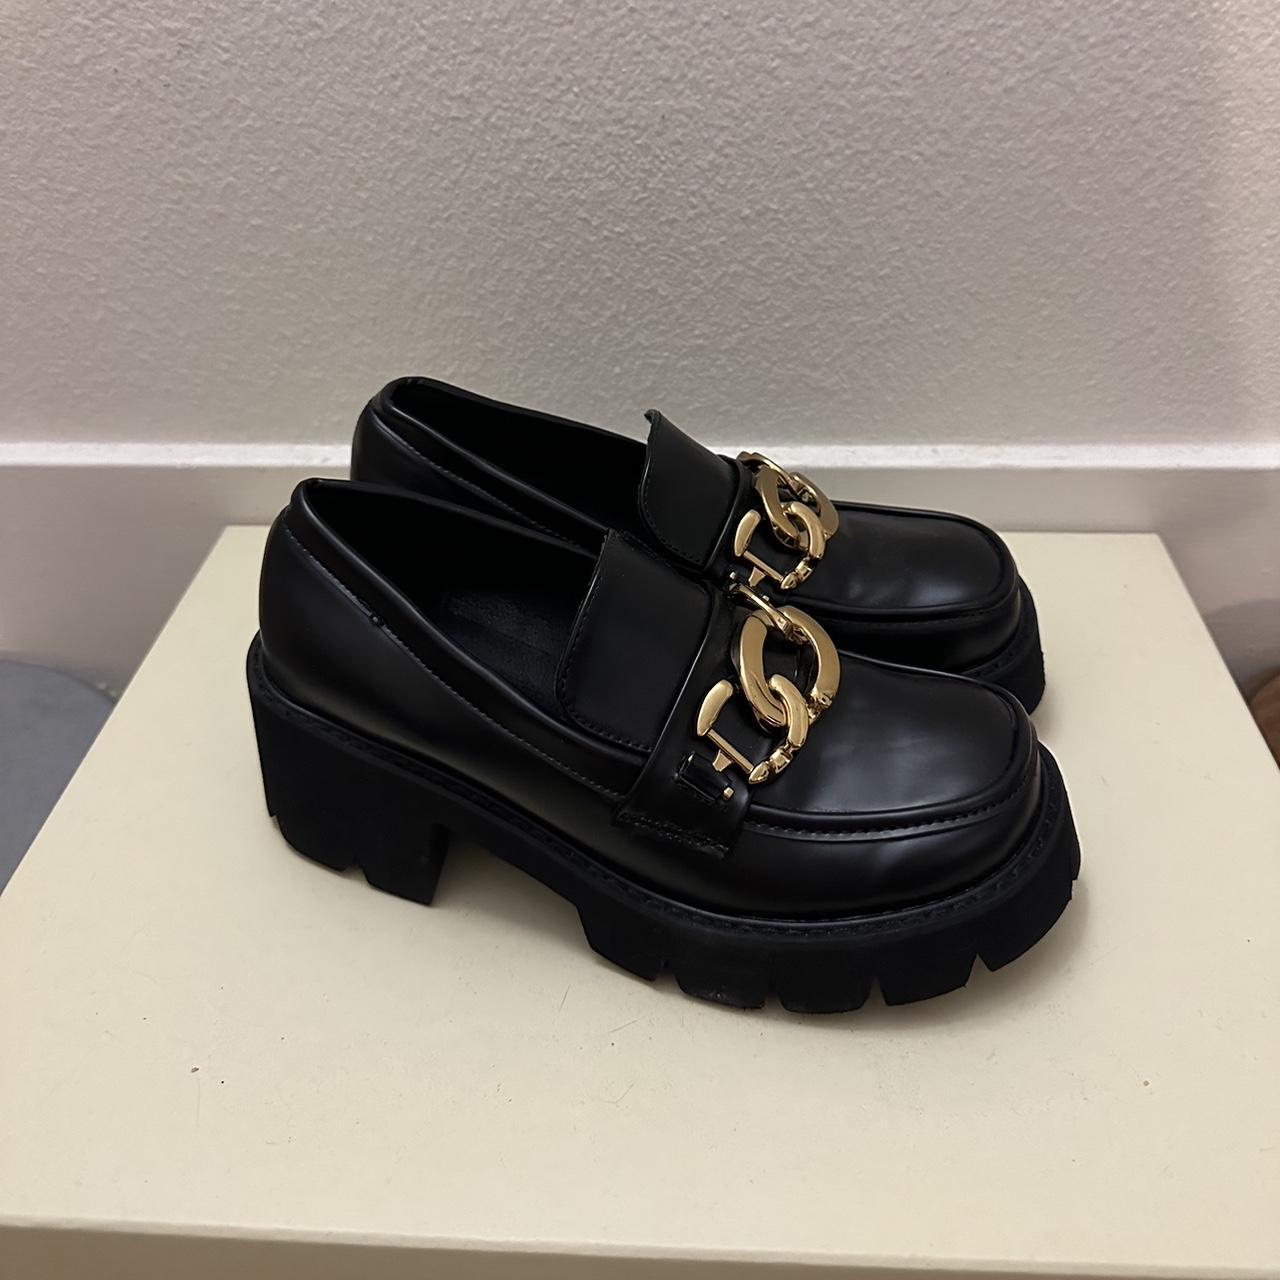 Black and gold loafers - Depop